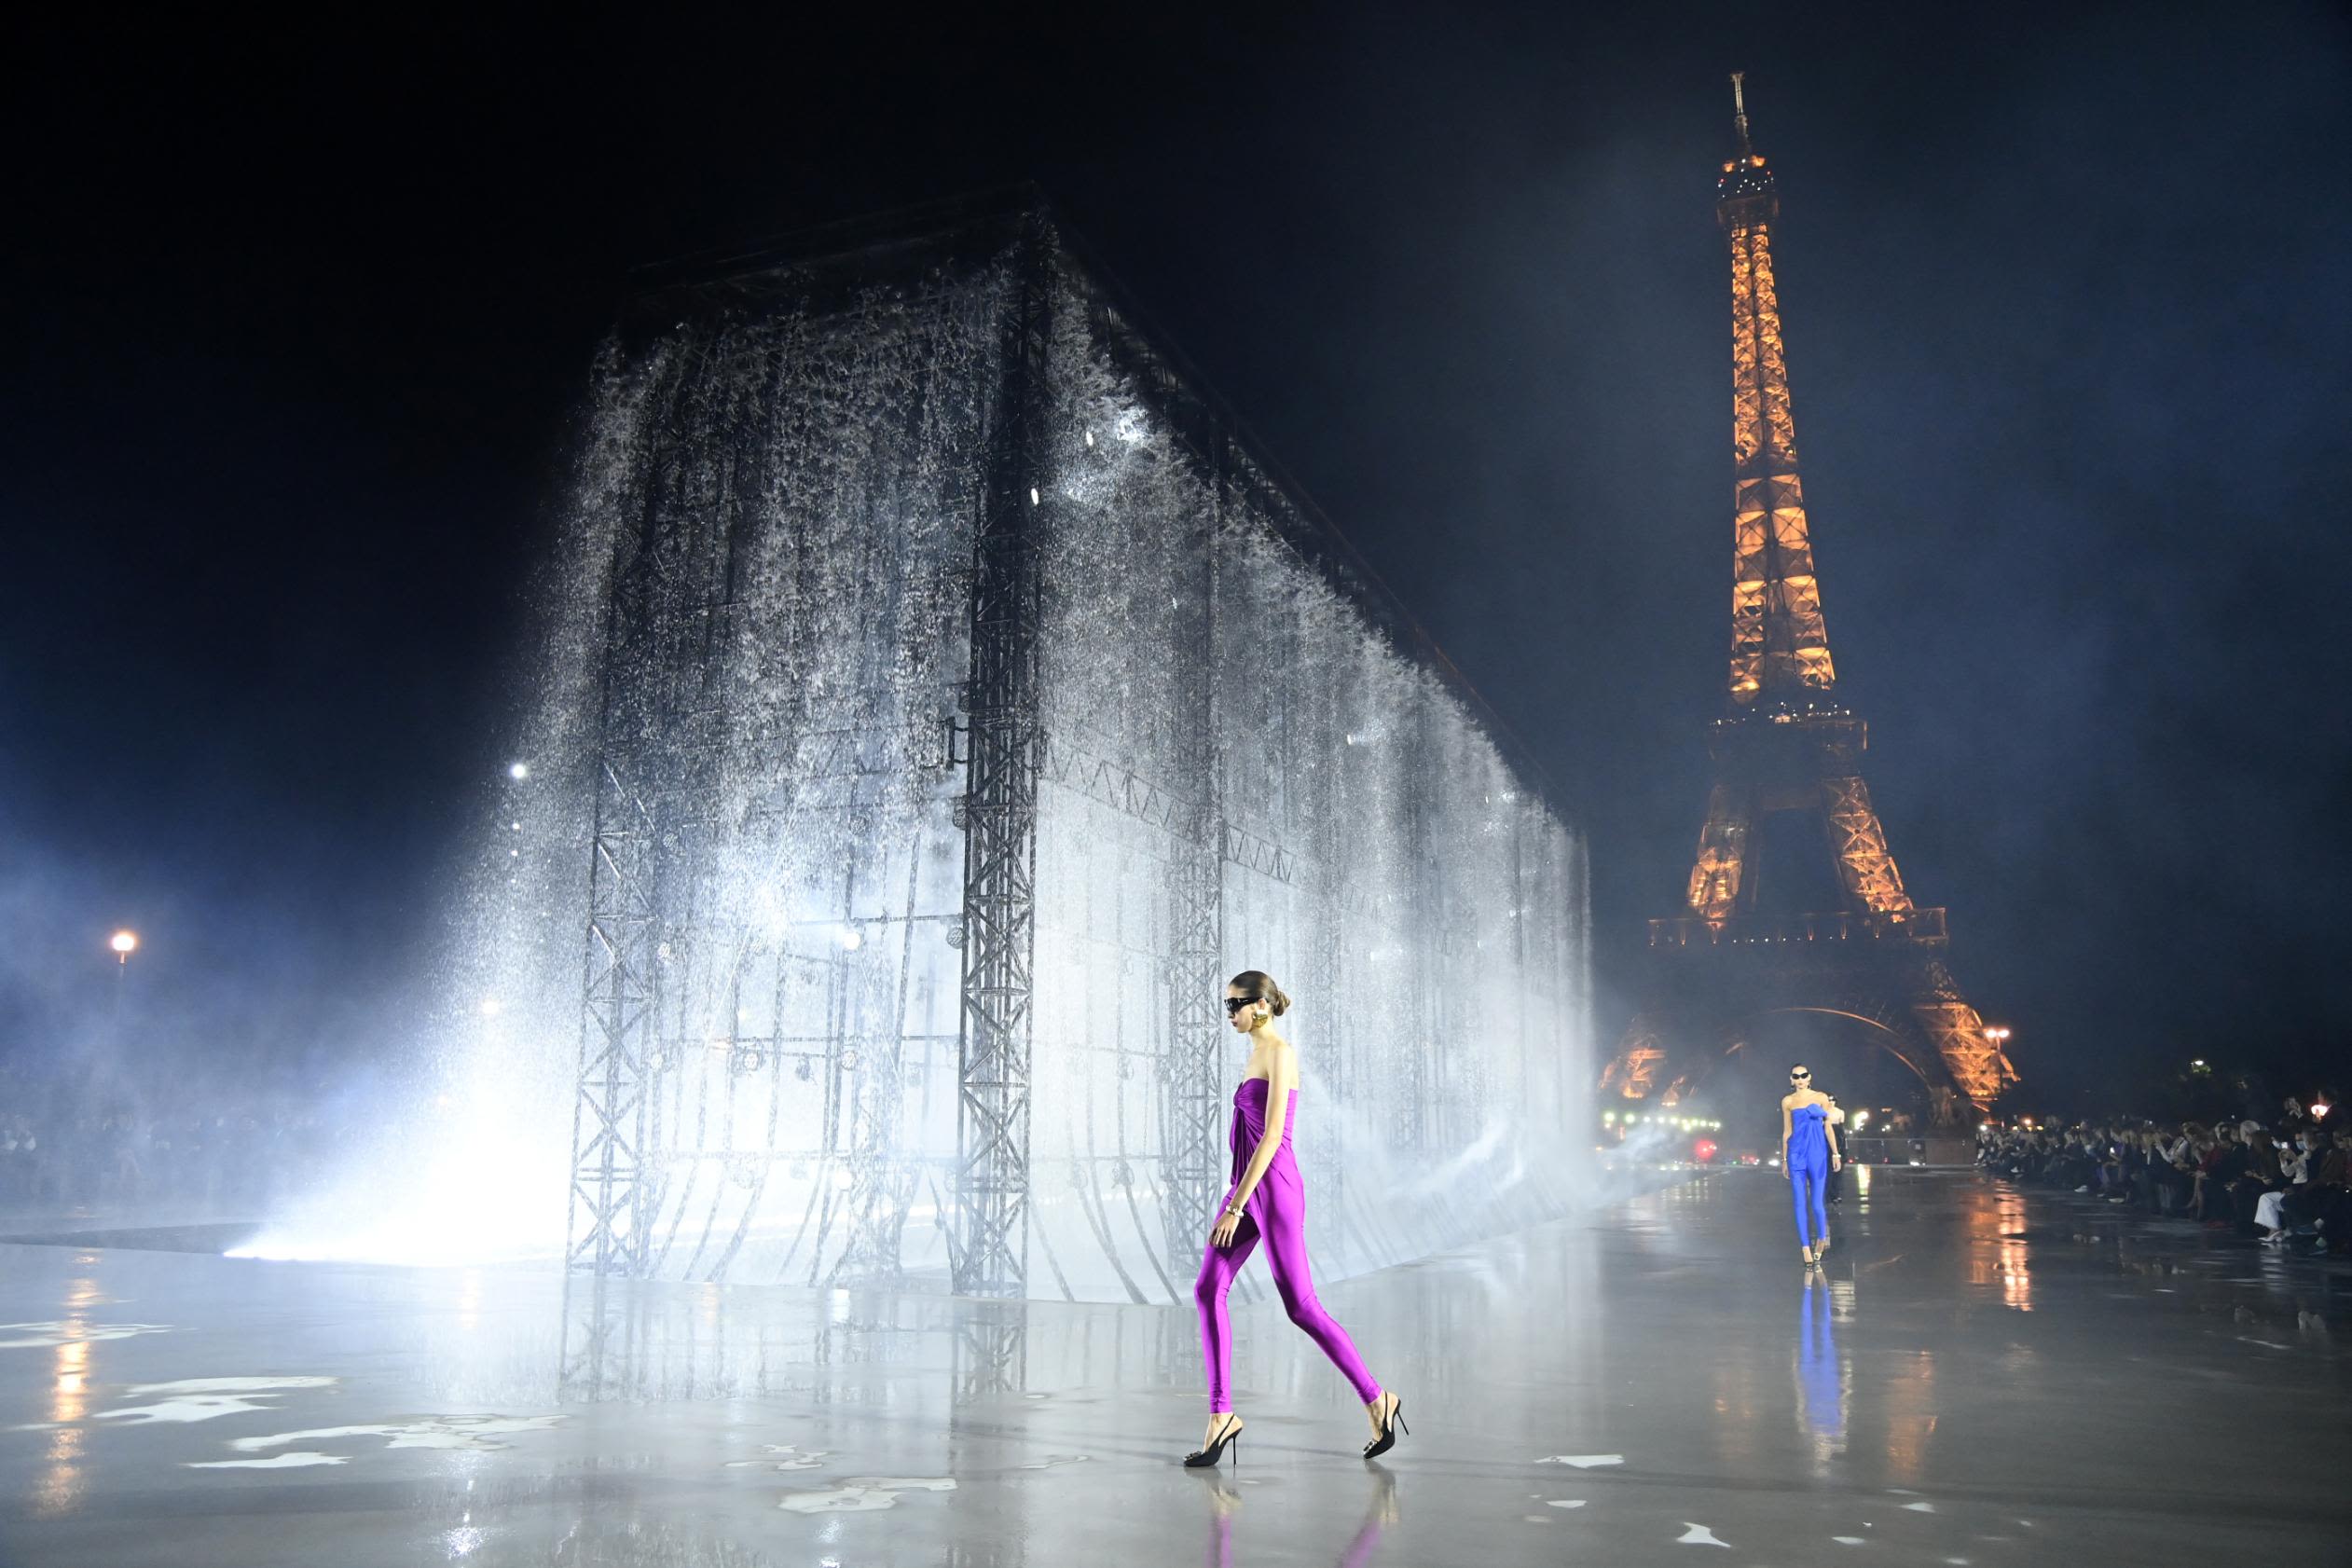 Paris Fashion Week Will Return With IRL Shows This September